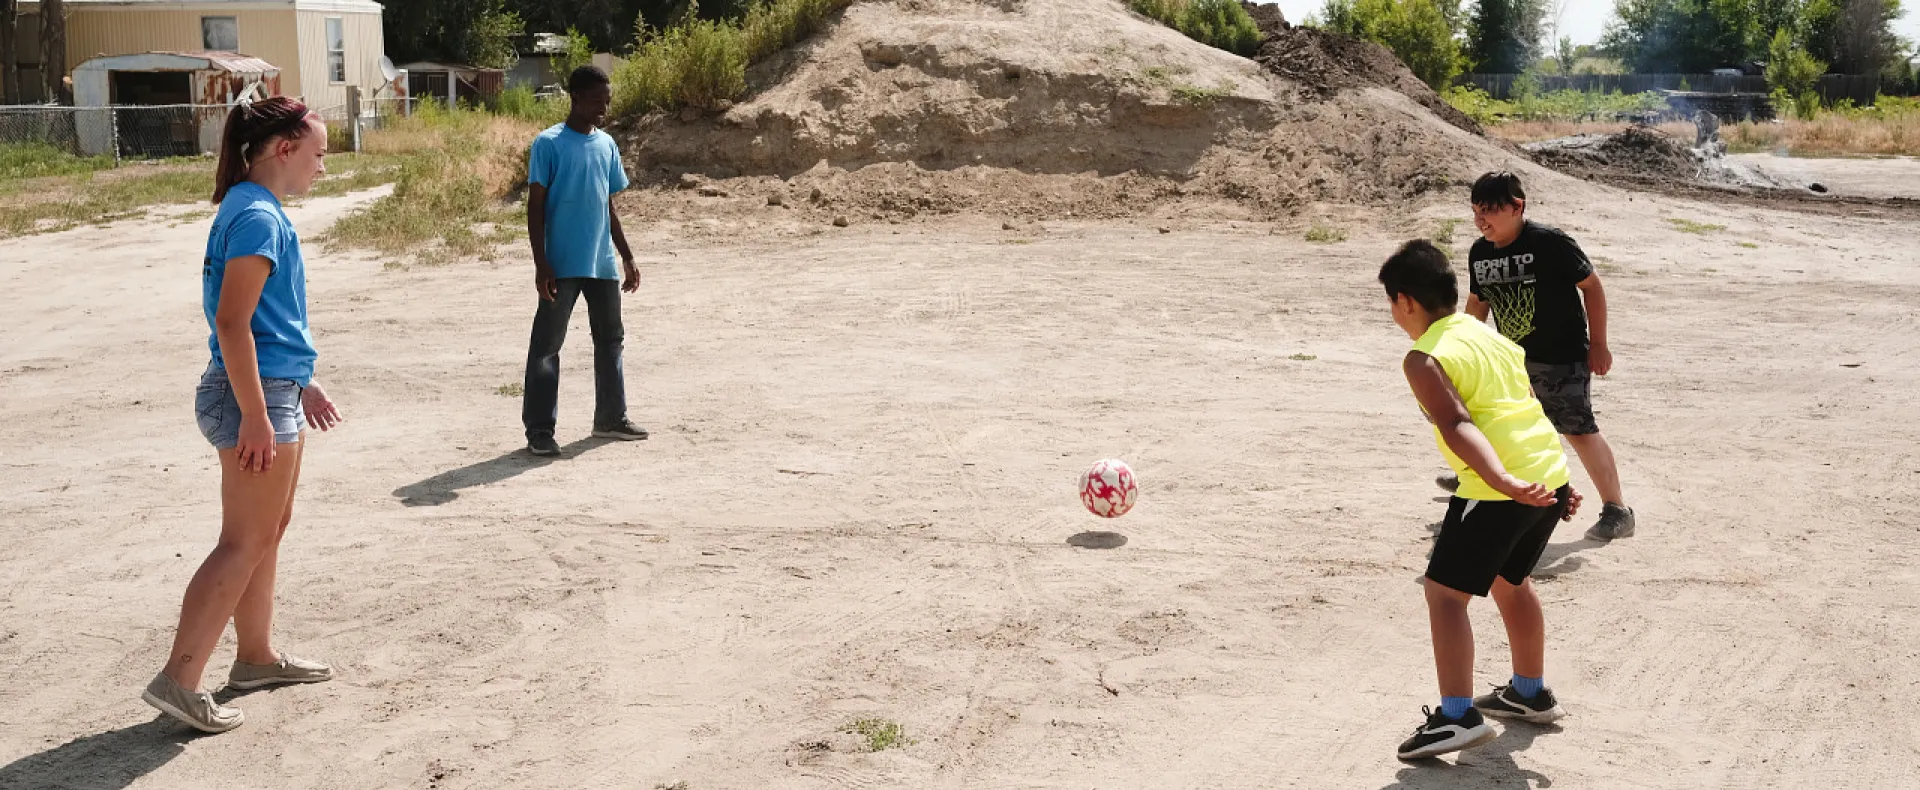 Volunteers and kids playing soccer on a barren field